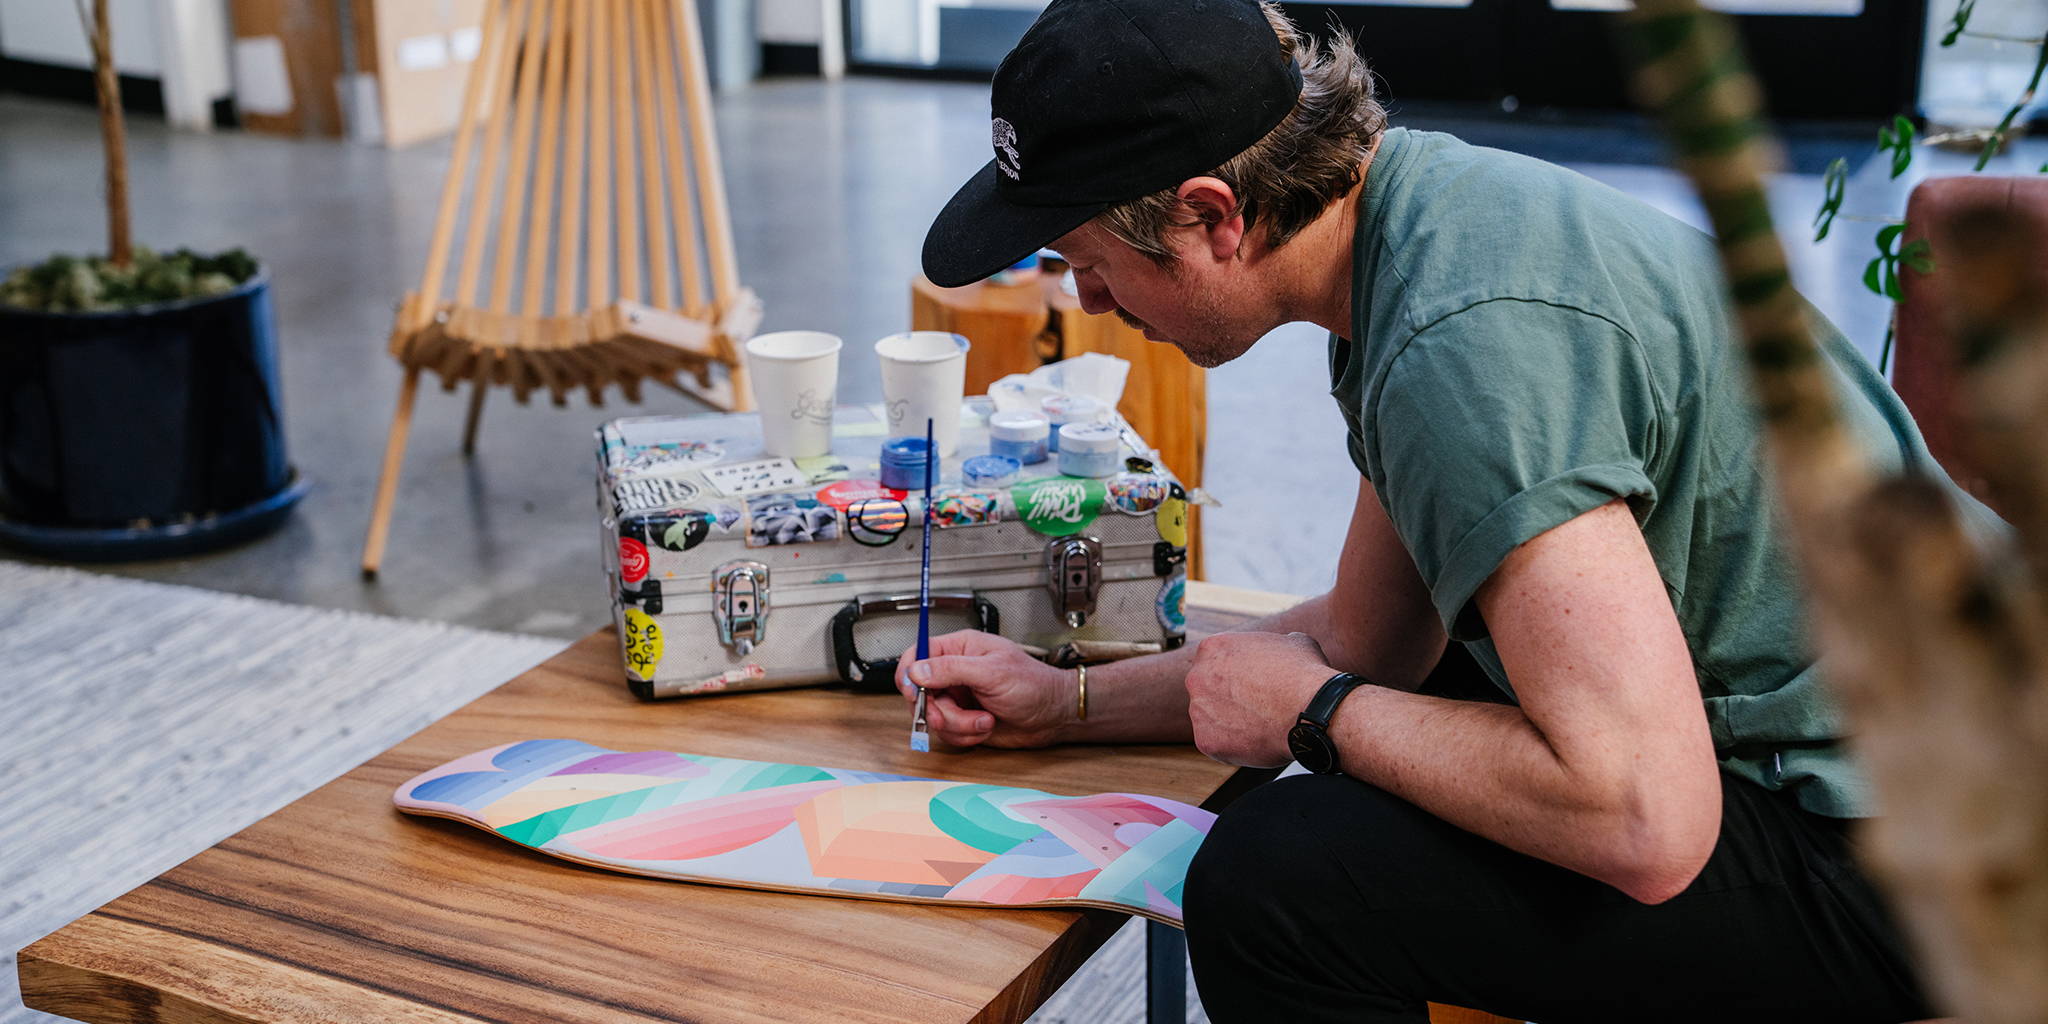 Nathan Brown in his element, painting on the back of a skateboard in his signature style.